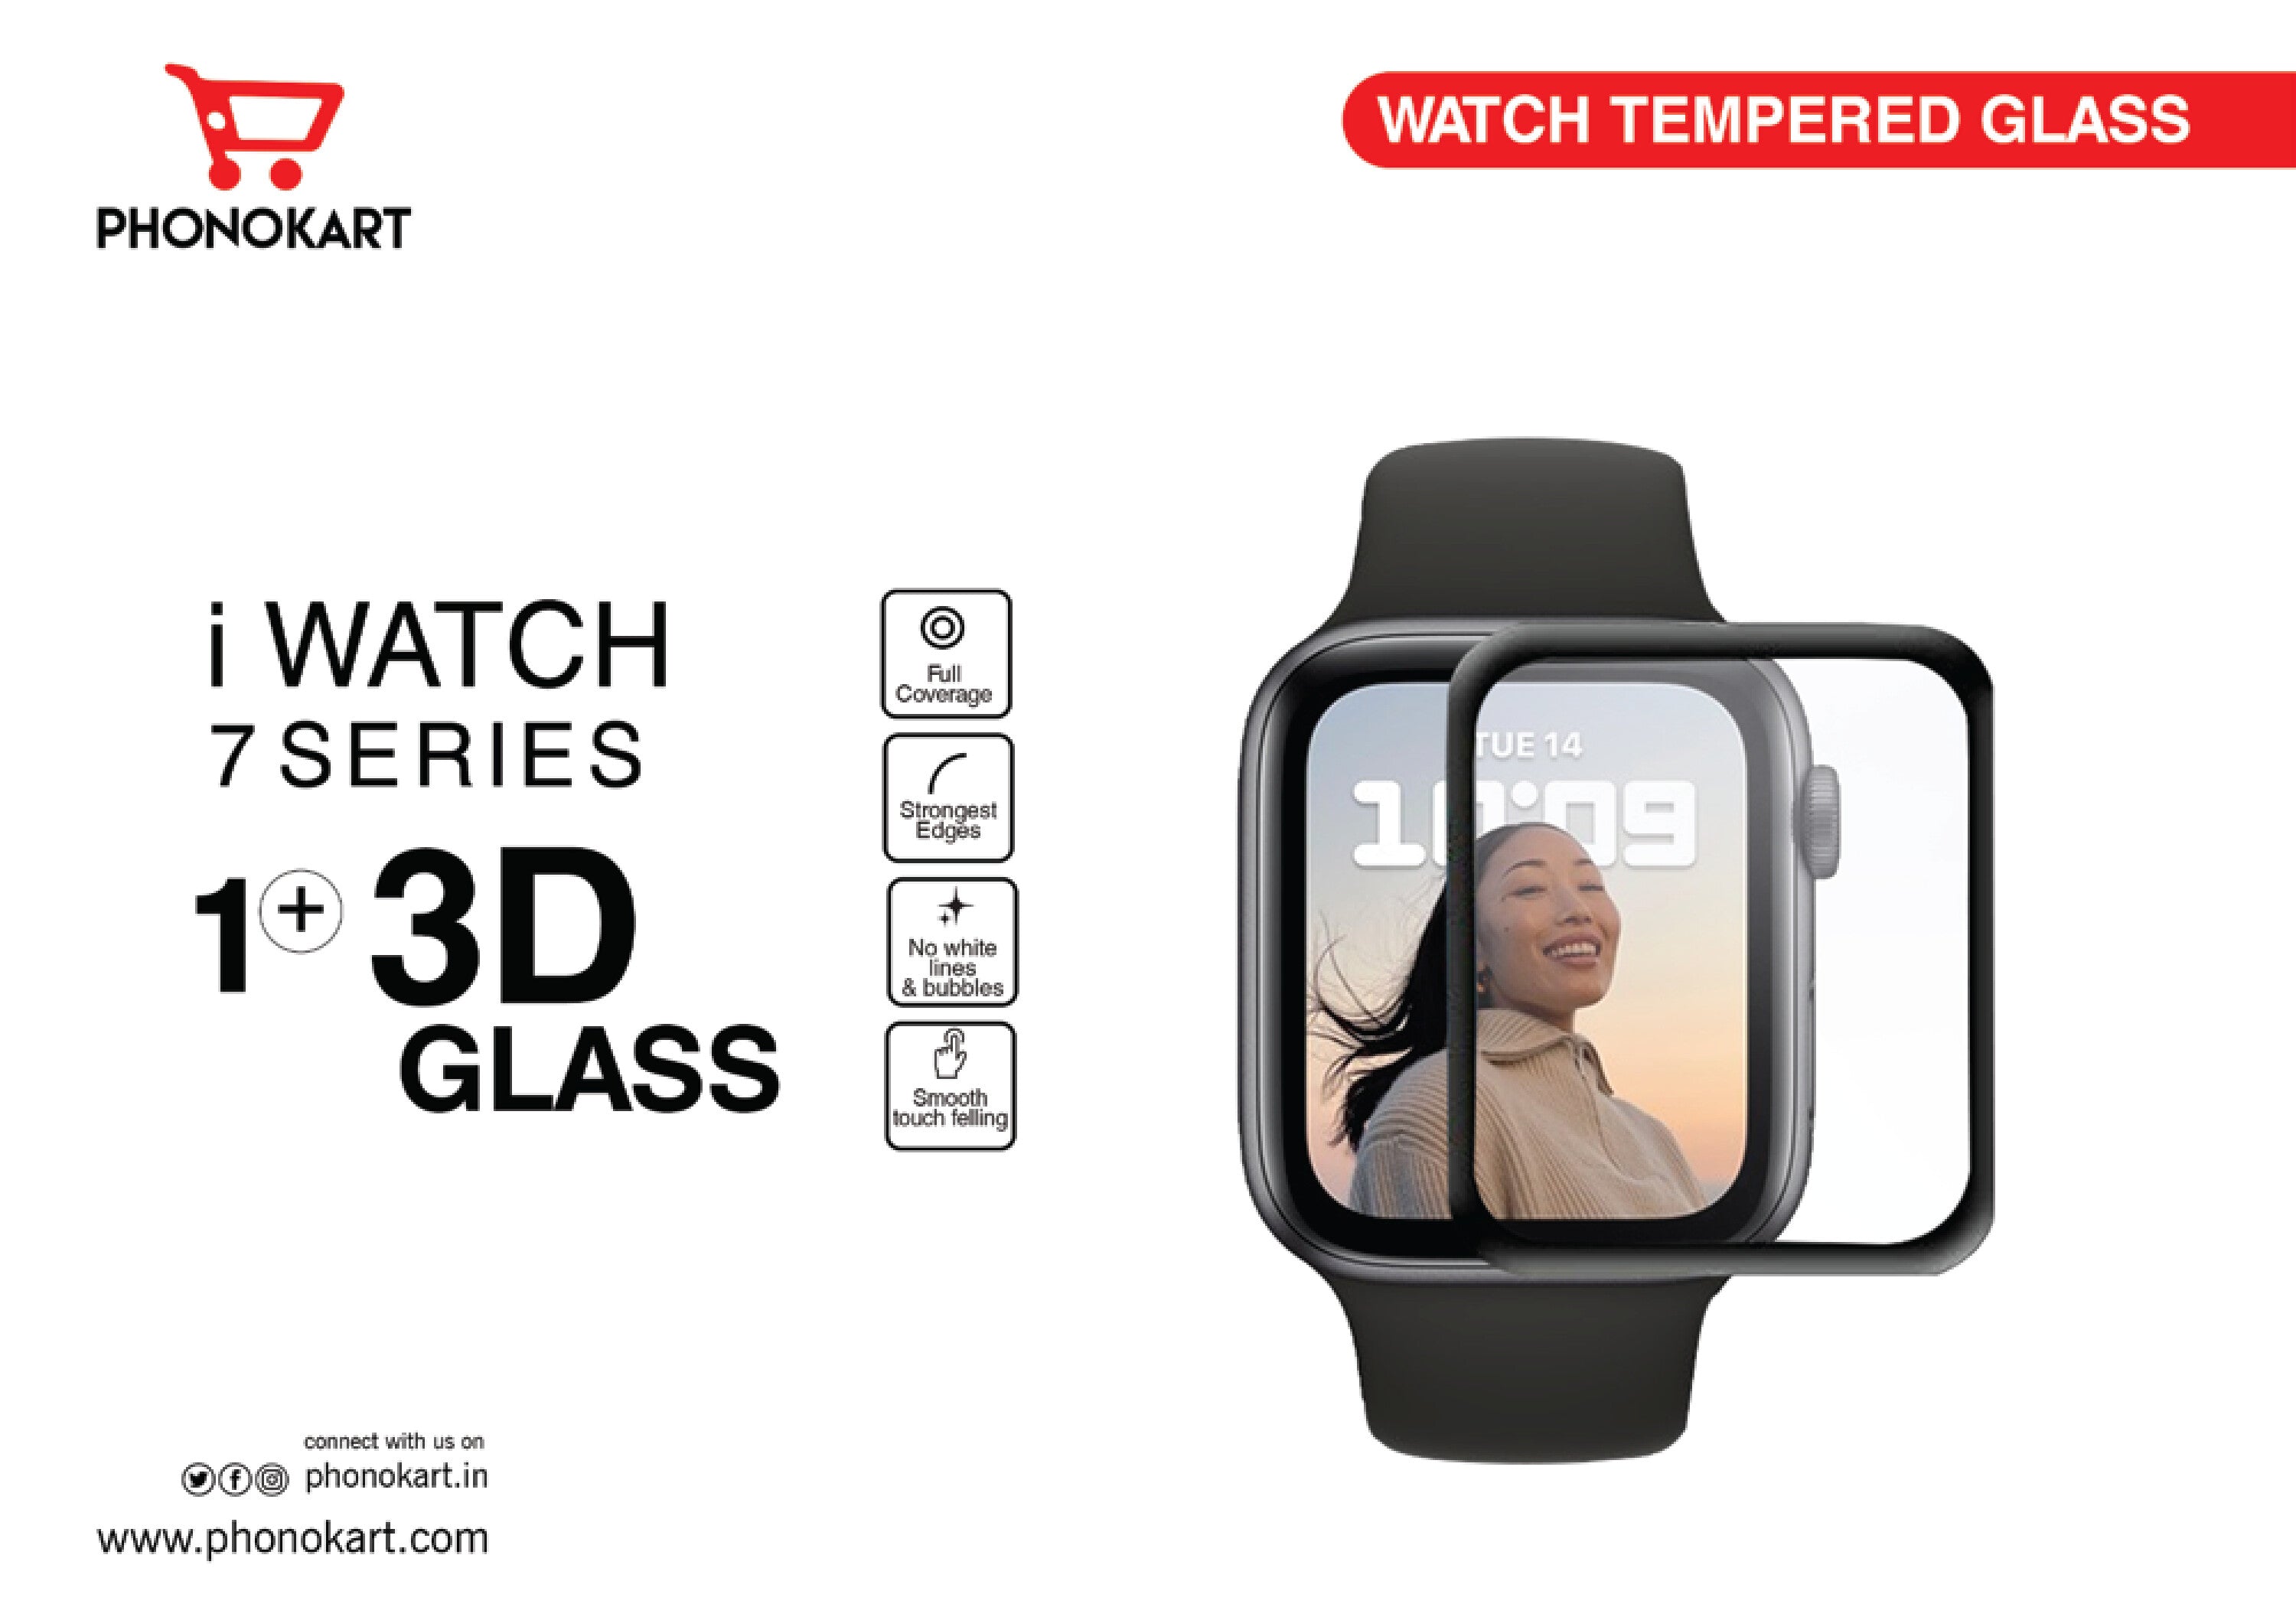 I PLUS IWATCH SCREEN PROTECTOR (40MM)